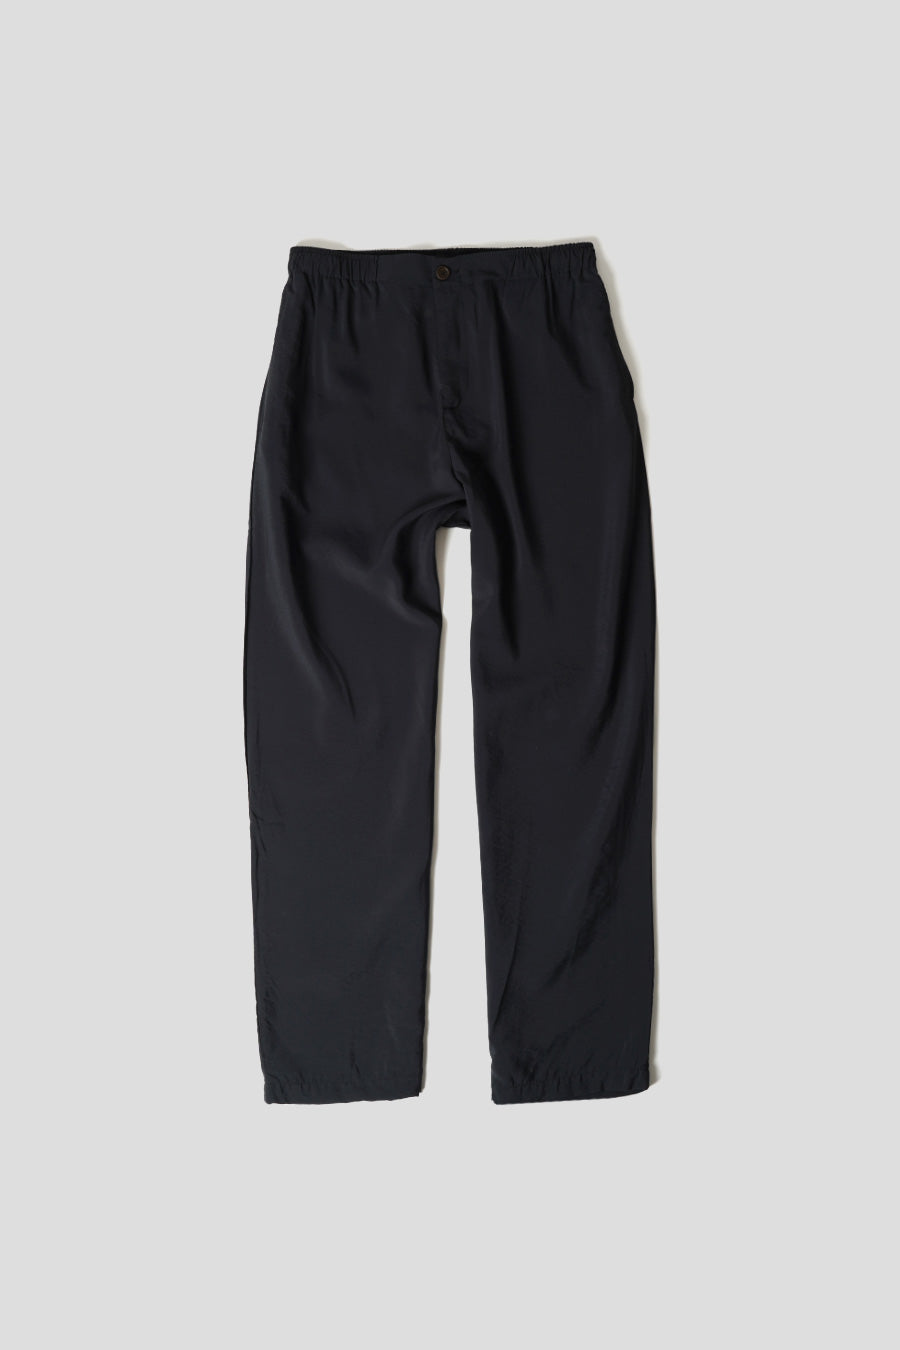 Our Legacy - BLACK LUFT TROUSERS - LE LABO STORE